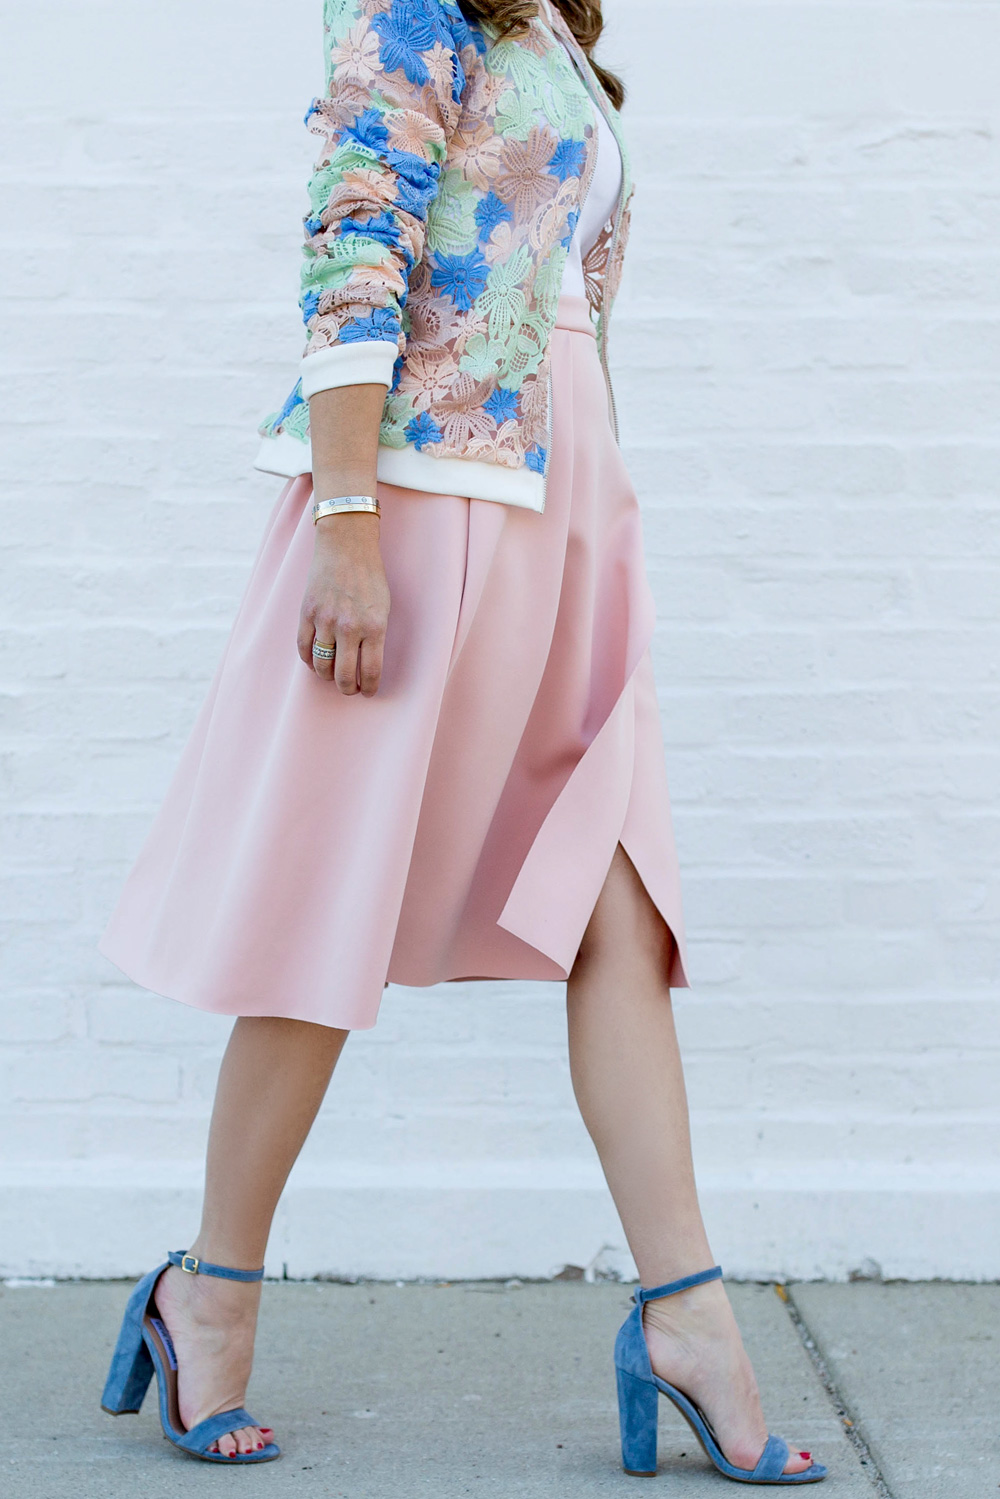 Jennifer Lake Style Charade in a Nordstrom pastel lace bomber jacket, pink skirt, and blue Steve Madden Carrson sandals